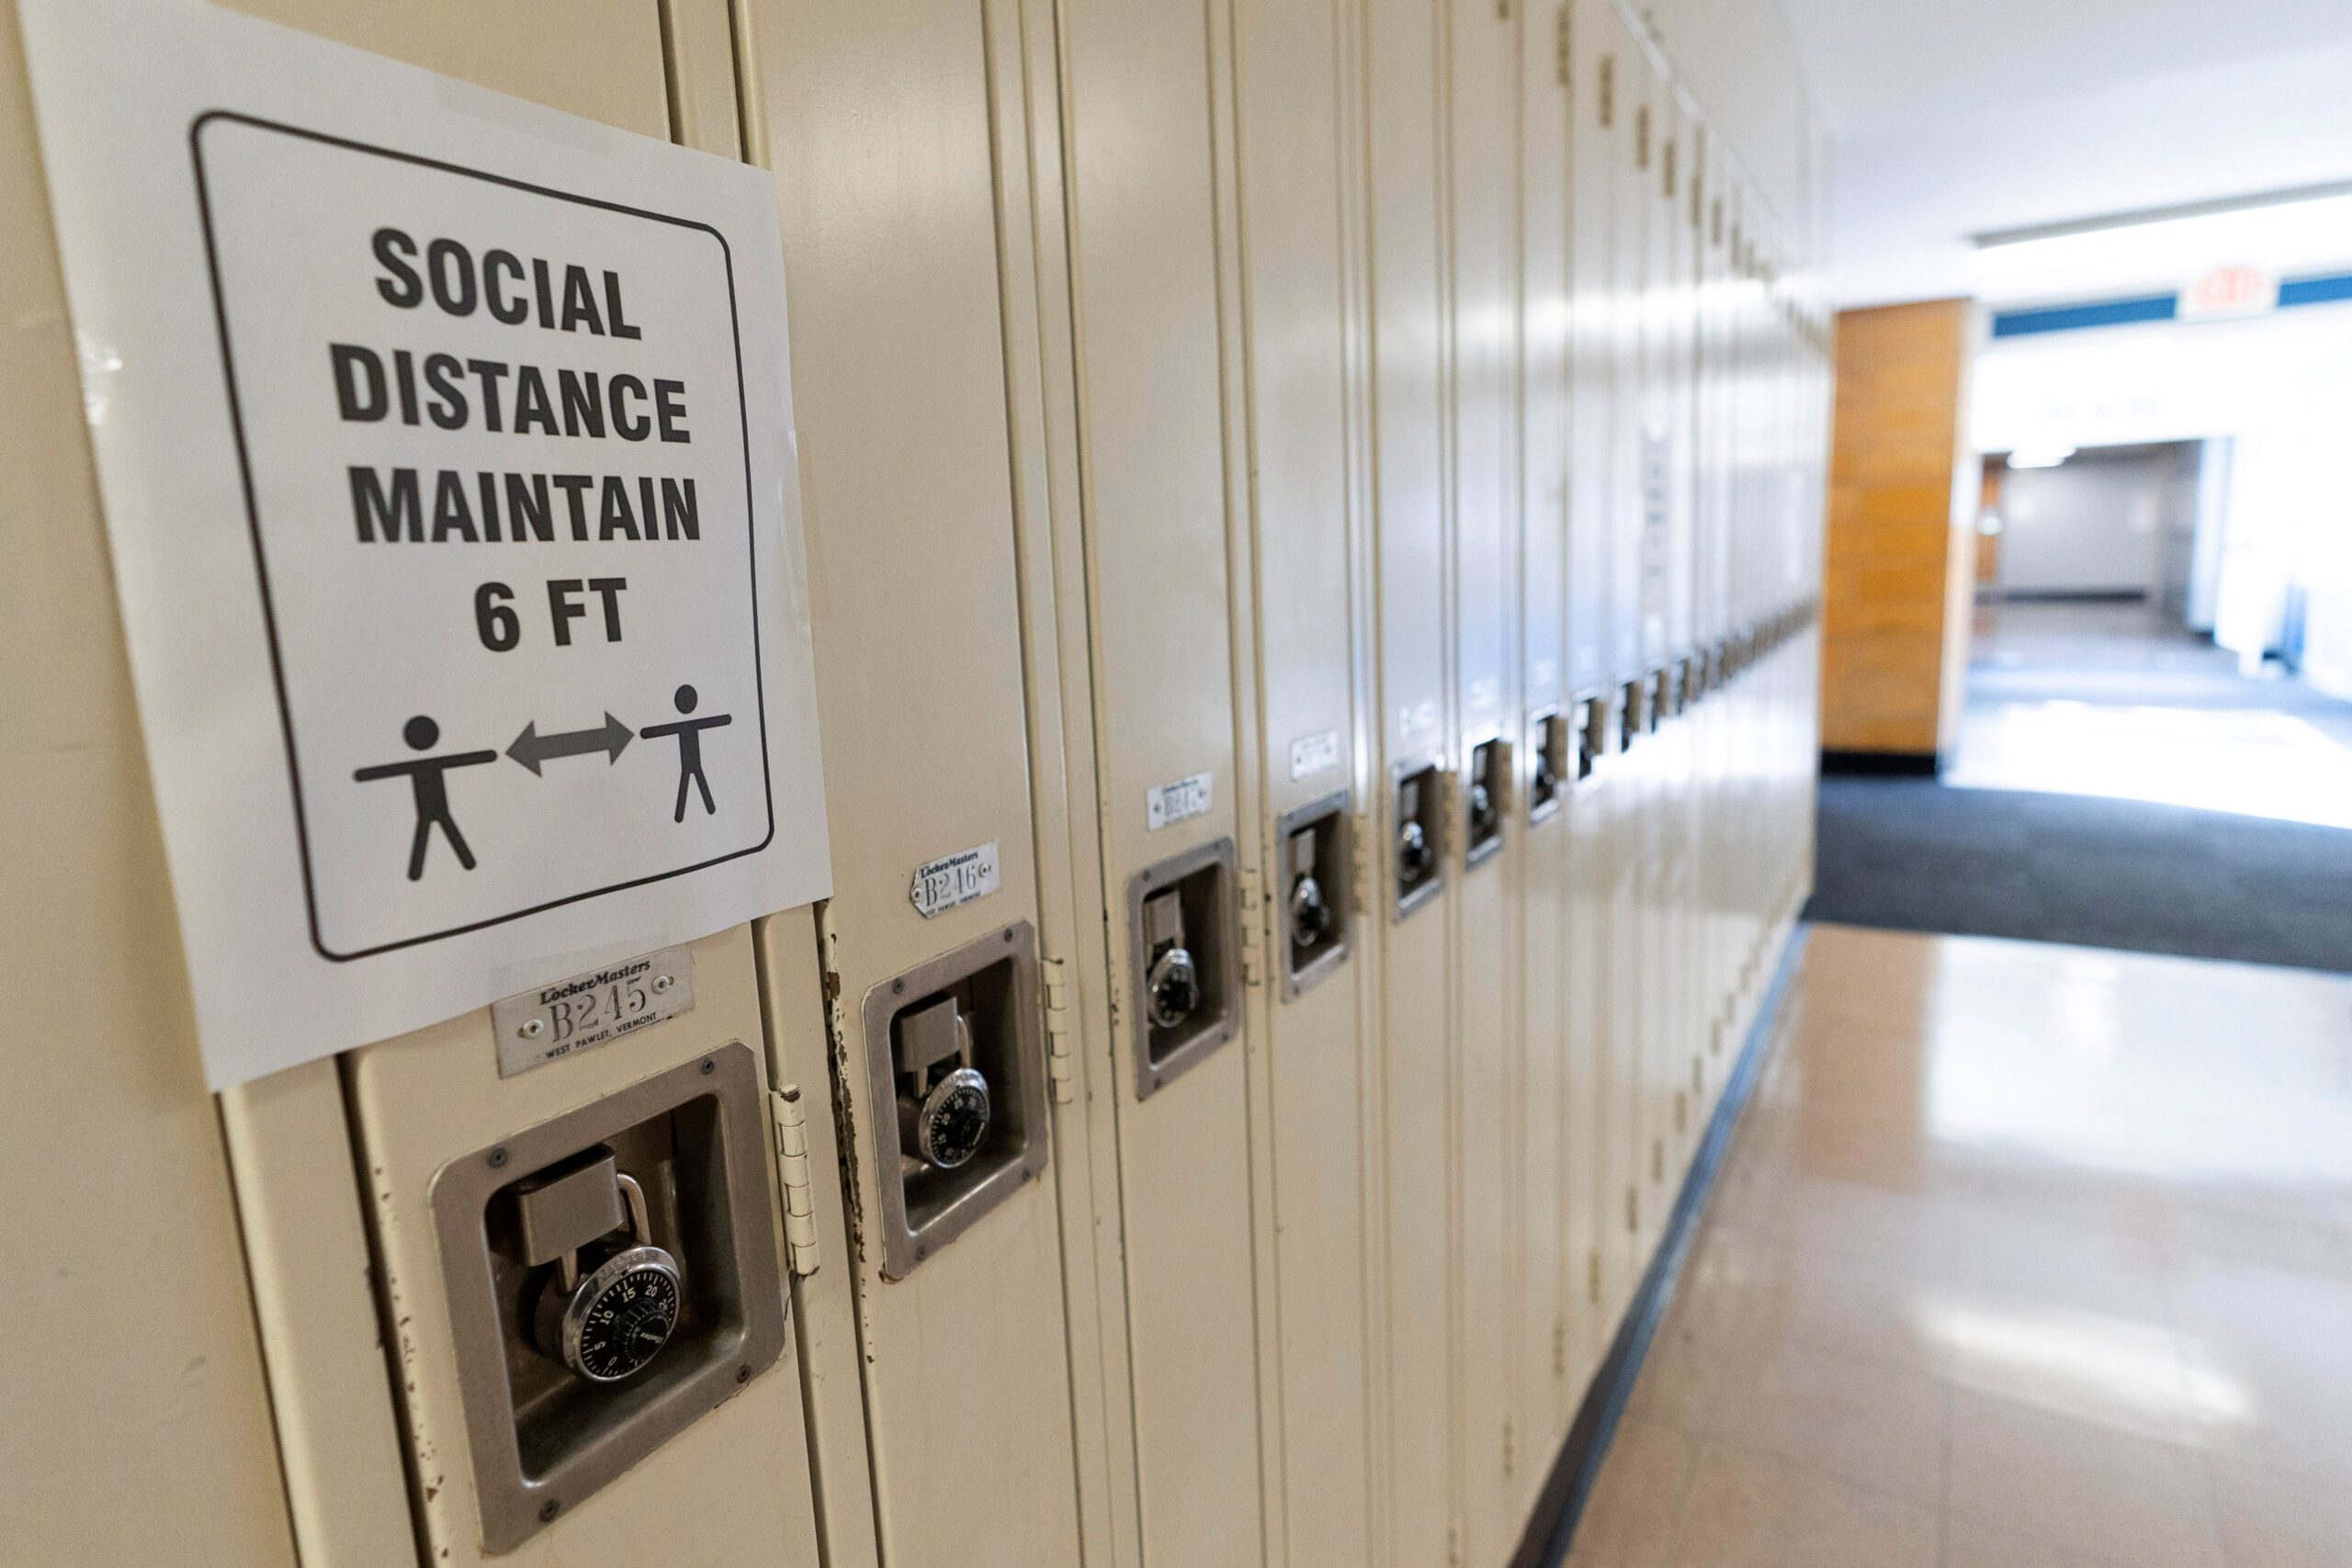 lockers, with a sign that says social distance maintain 6 ft